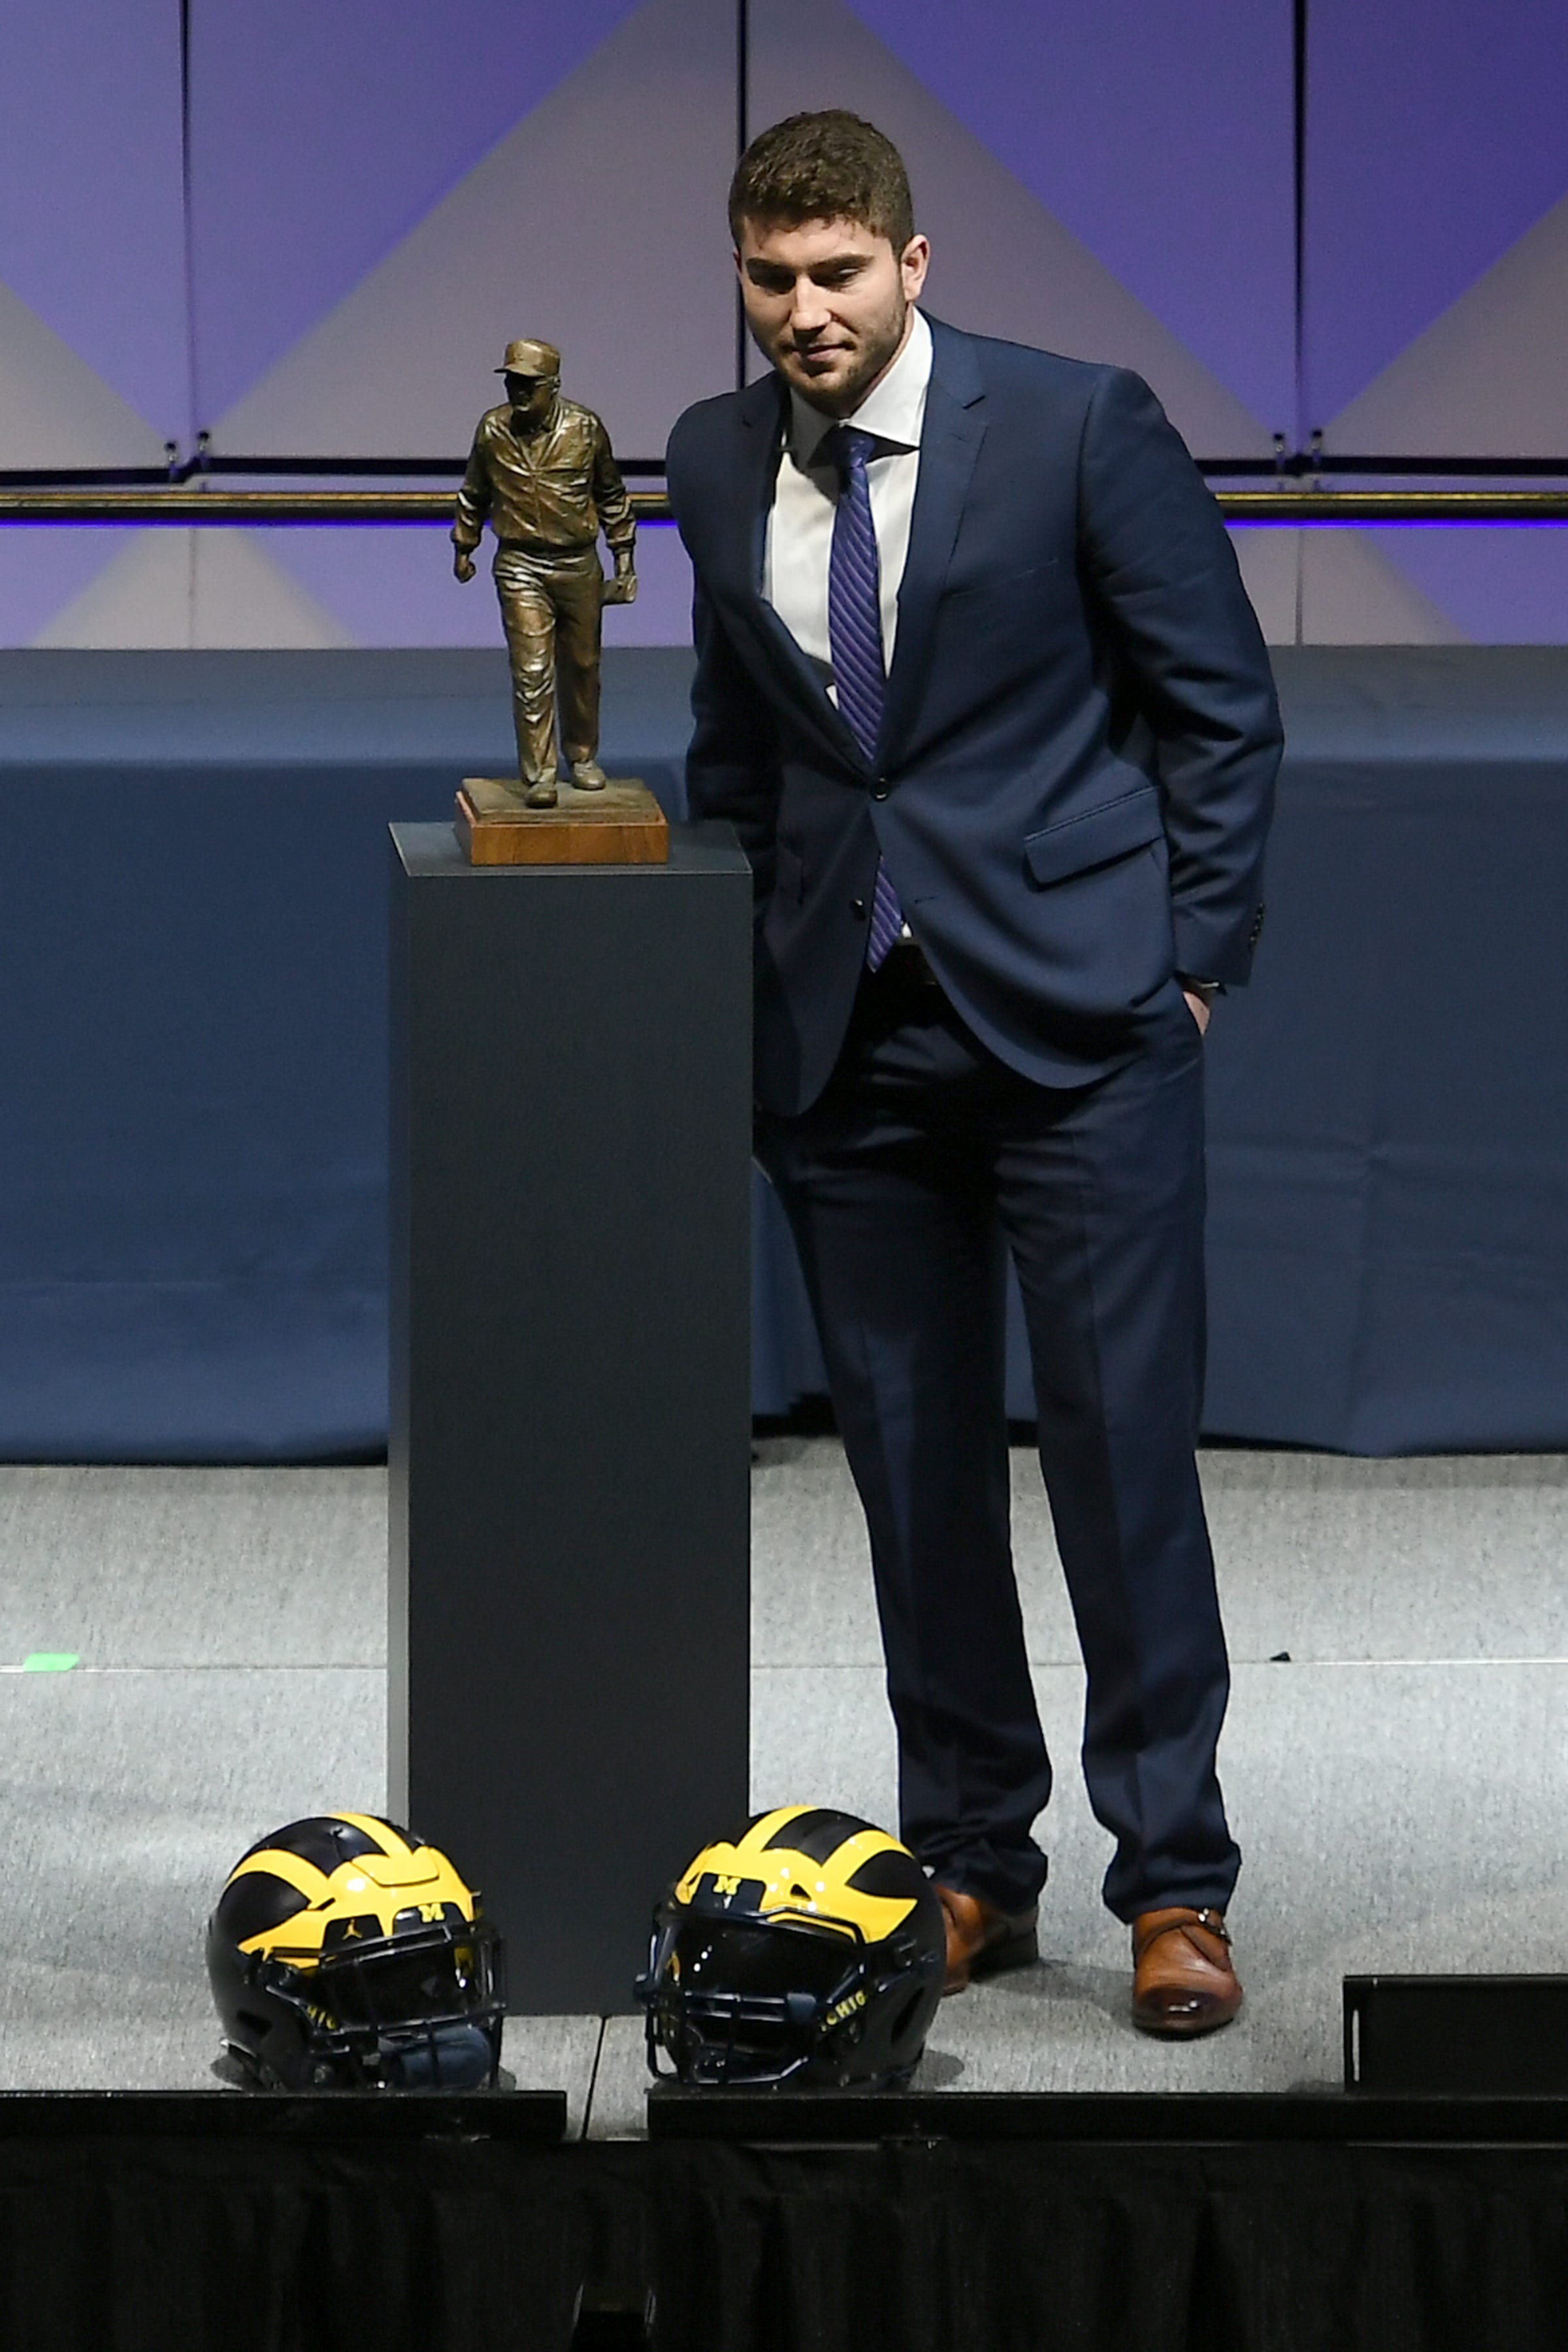 Michigan quarterback Shea Patterson poses with a statue of former Michigan football Bo Schembechler after being named Michigan's Offensive Player of the Year.